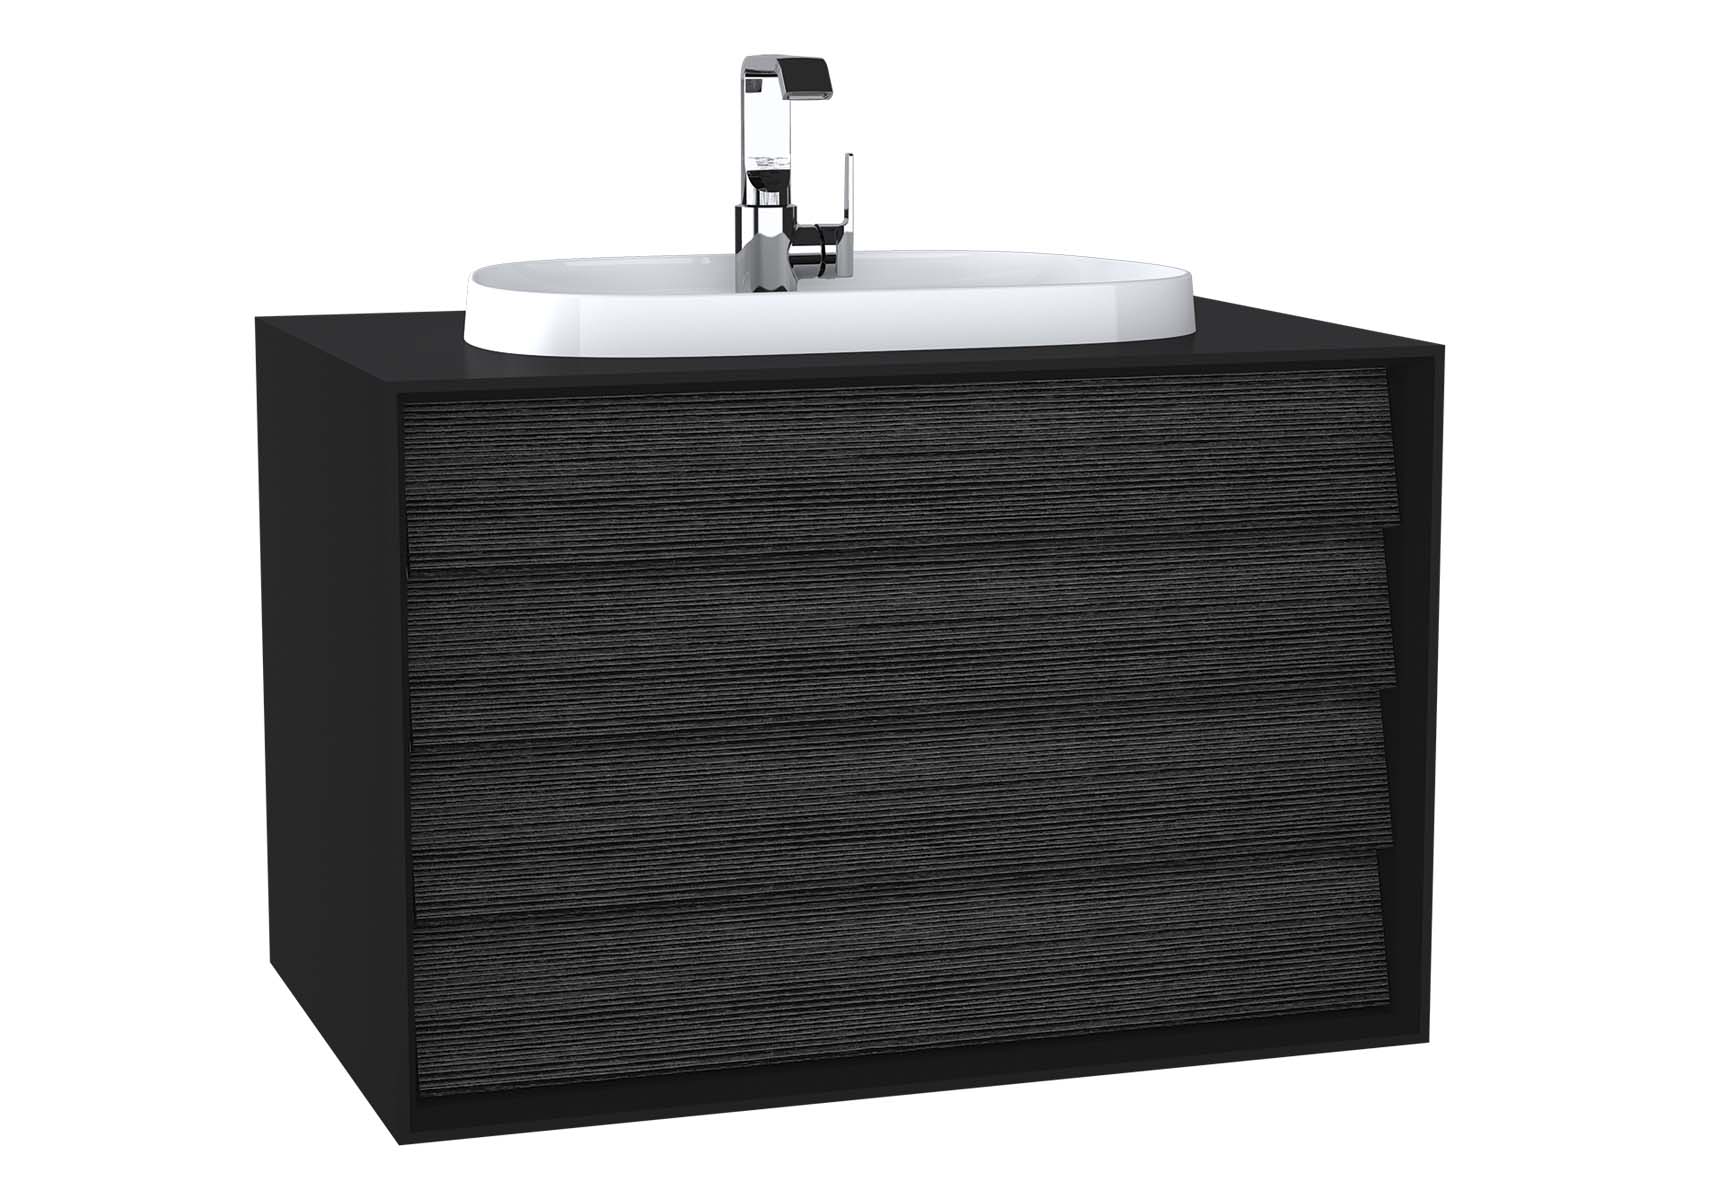 Frame Washbasin Unit, 80 cm, with 2 drawers, with countertop TV-shape washbasin, with faucet hole, Matte Black